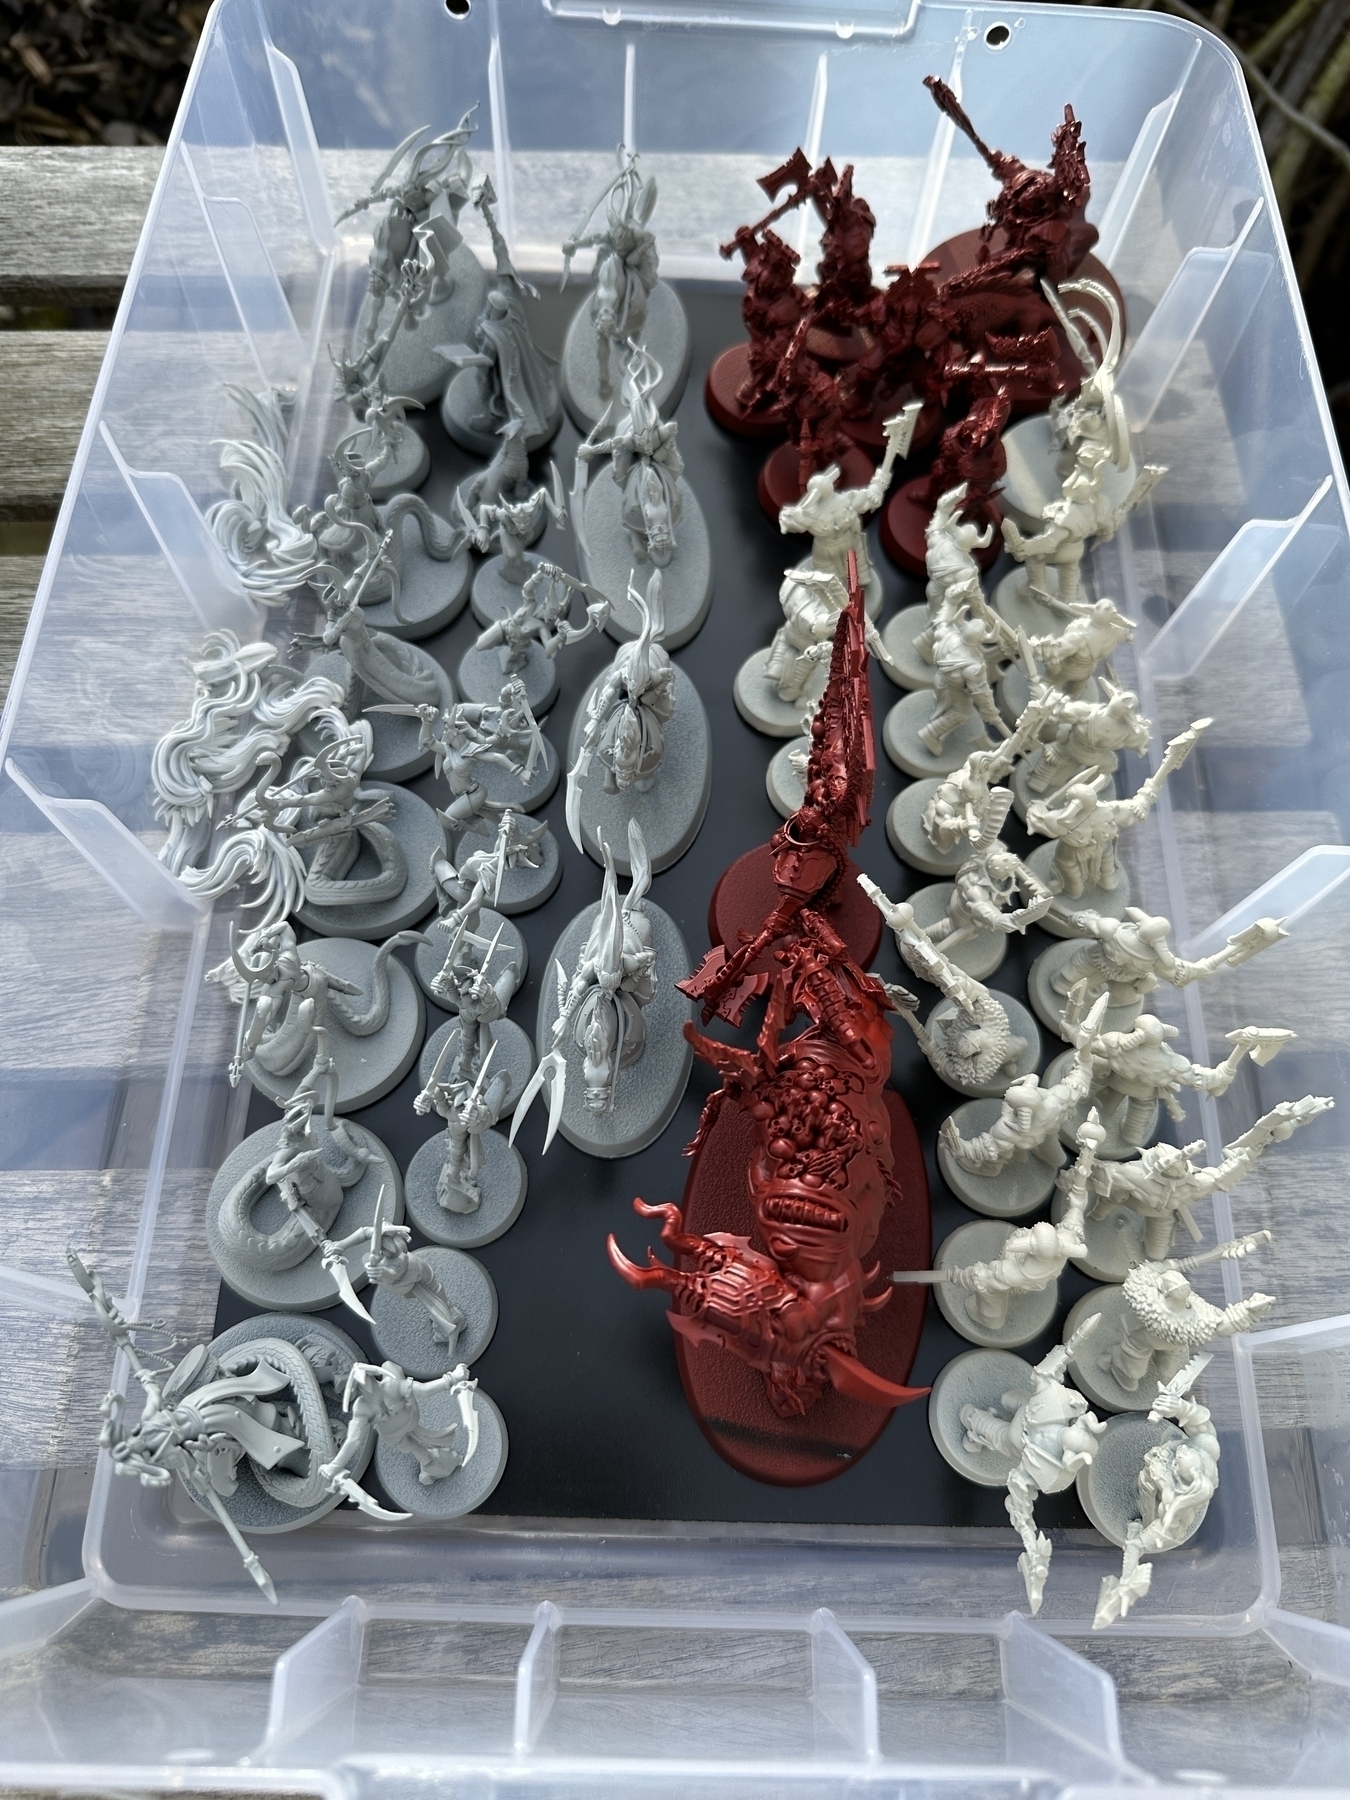 A box of games workshop miniatures that have been sprayed with various colours of primer. There are 23 in light grey, 8 in bright red, and 21 in warm, off-white